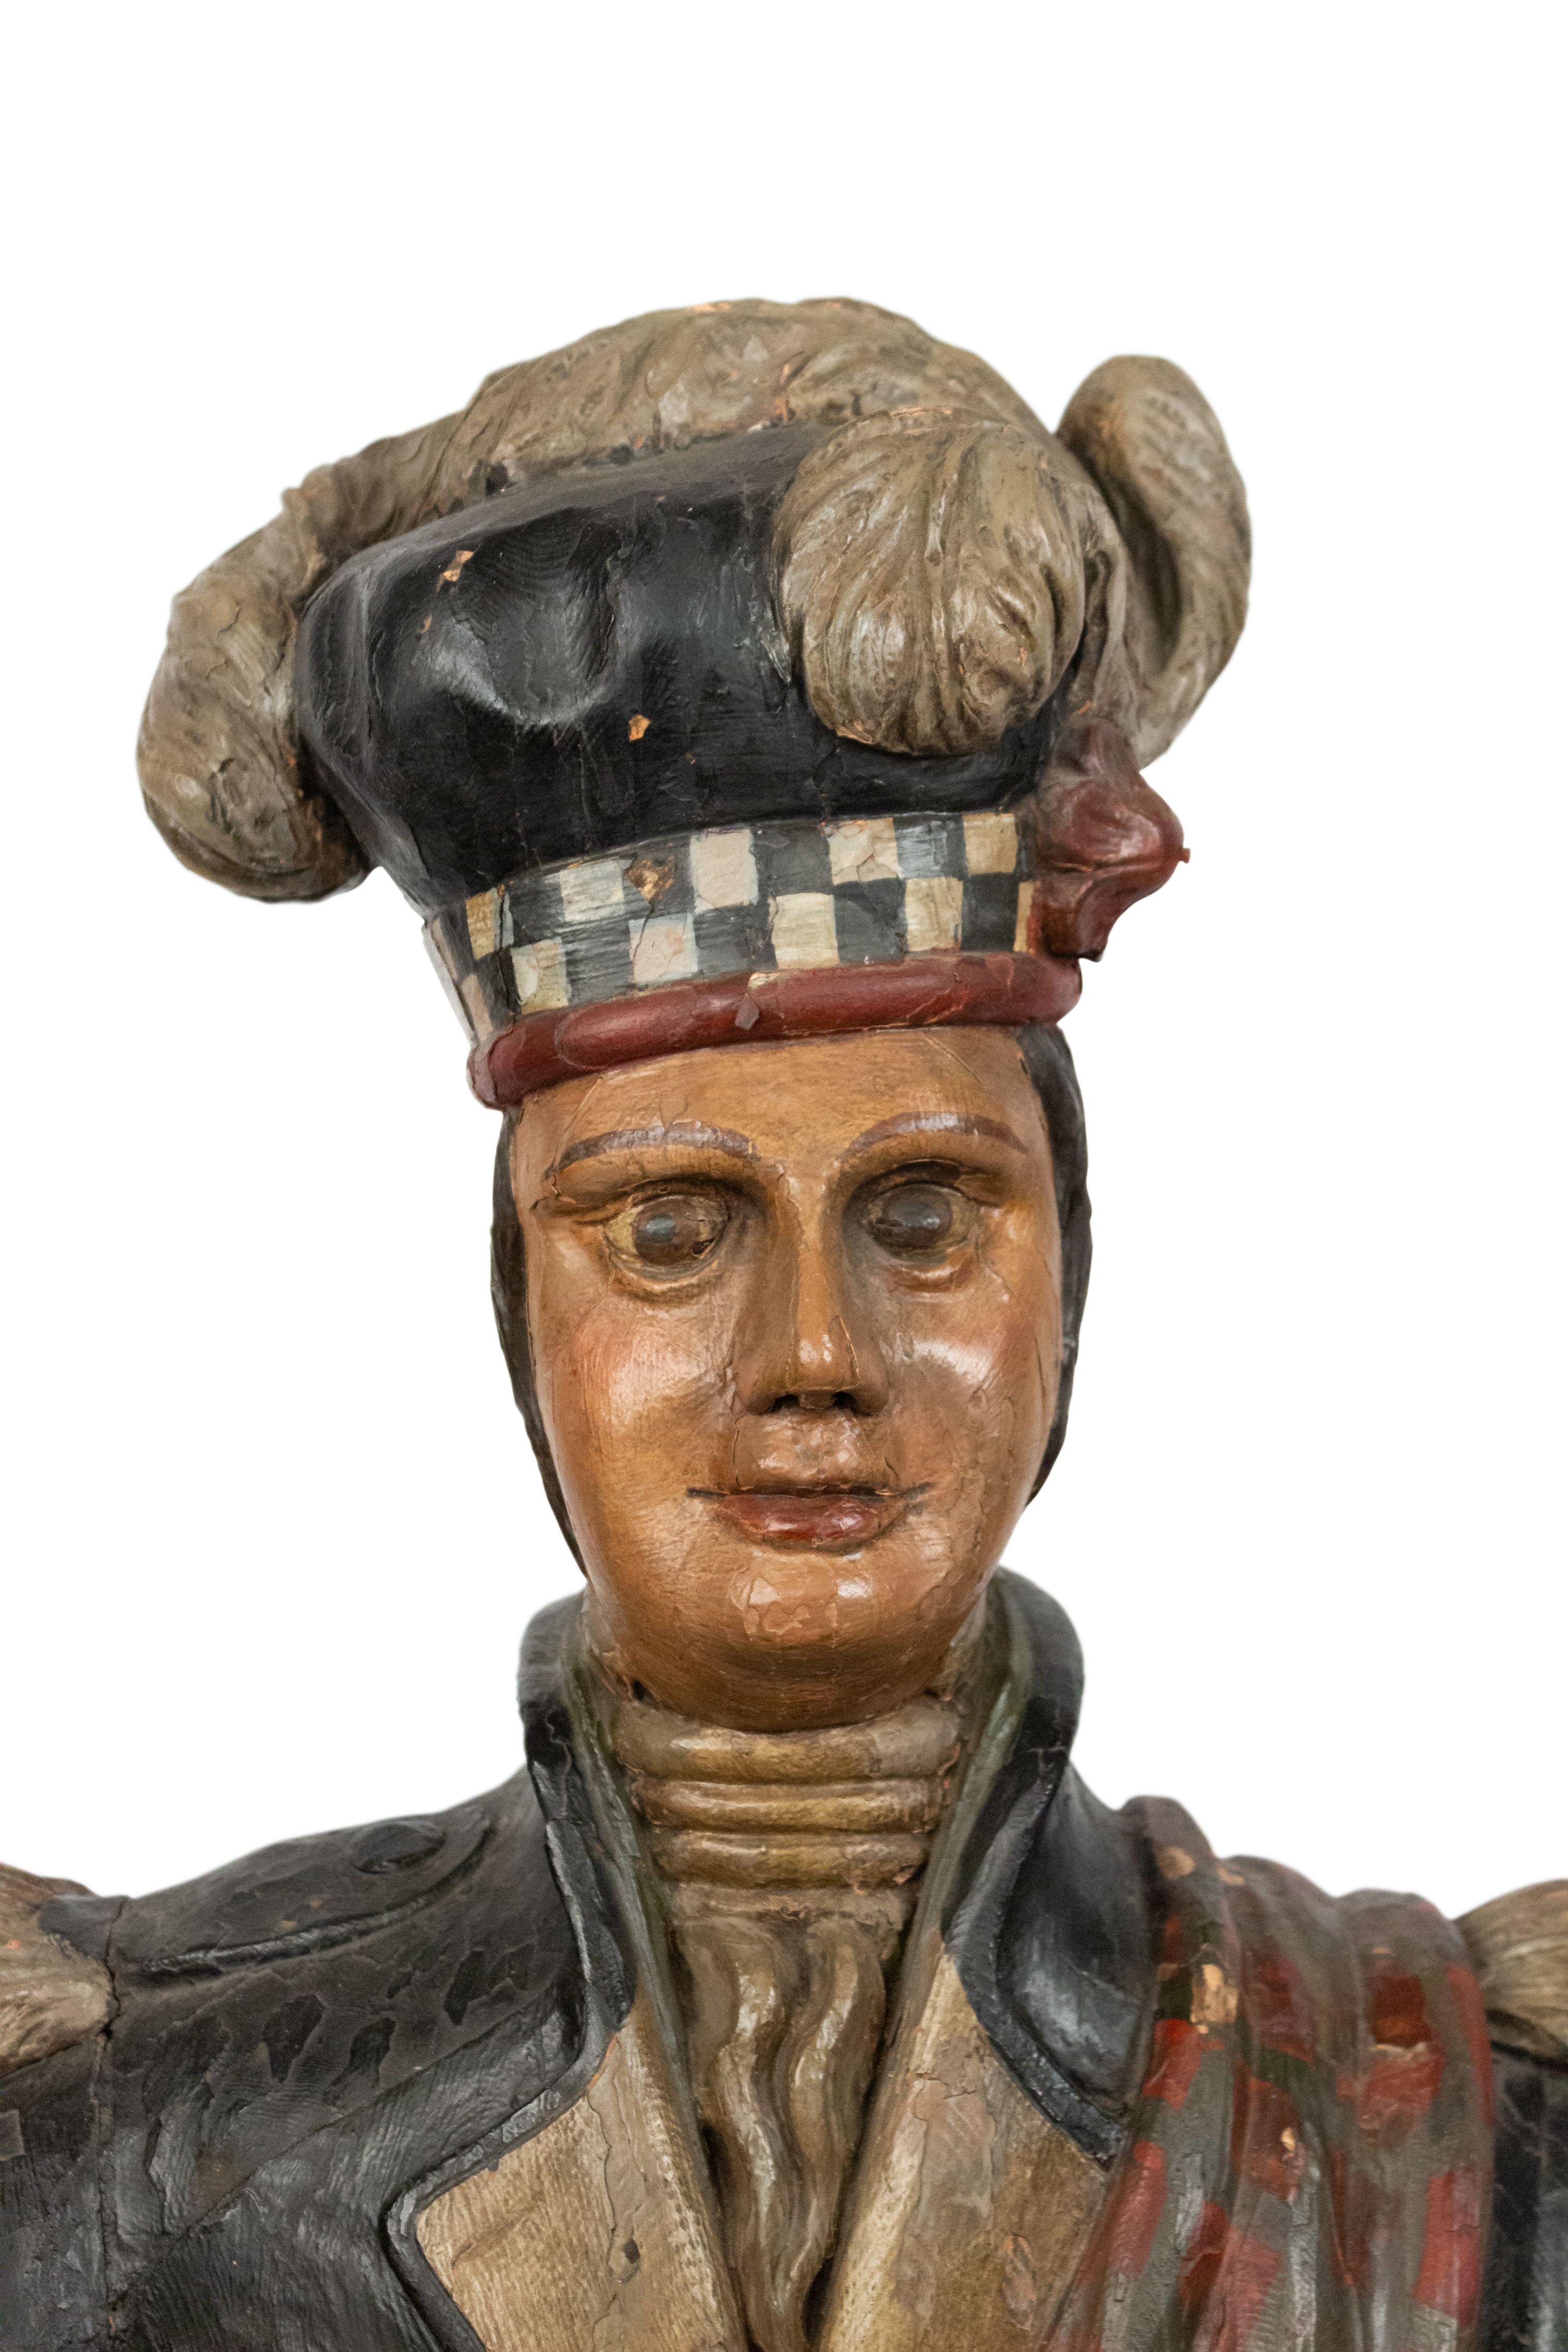 19th century Scotsman (Highlander) Carousel large carved and painted standing figure wearing kilt with plume hat on large round base.